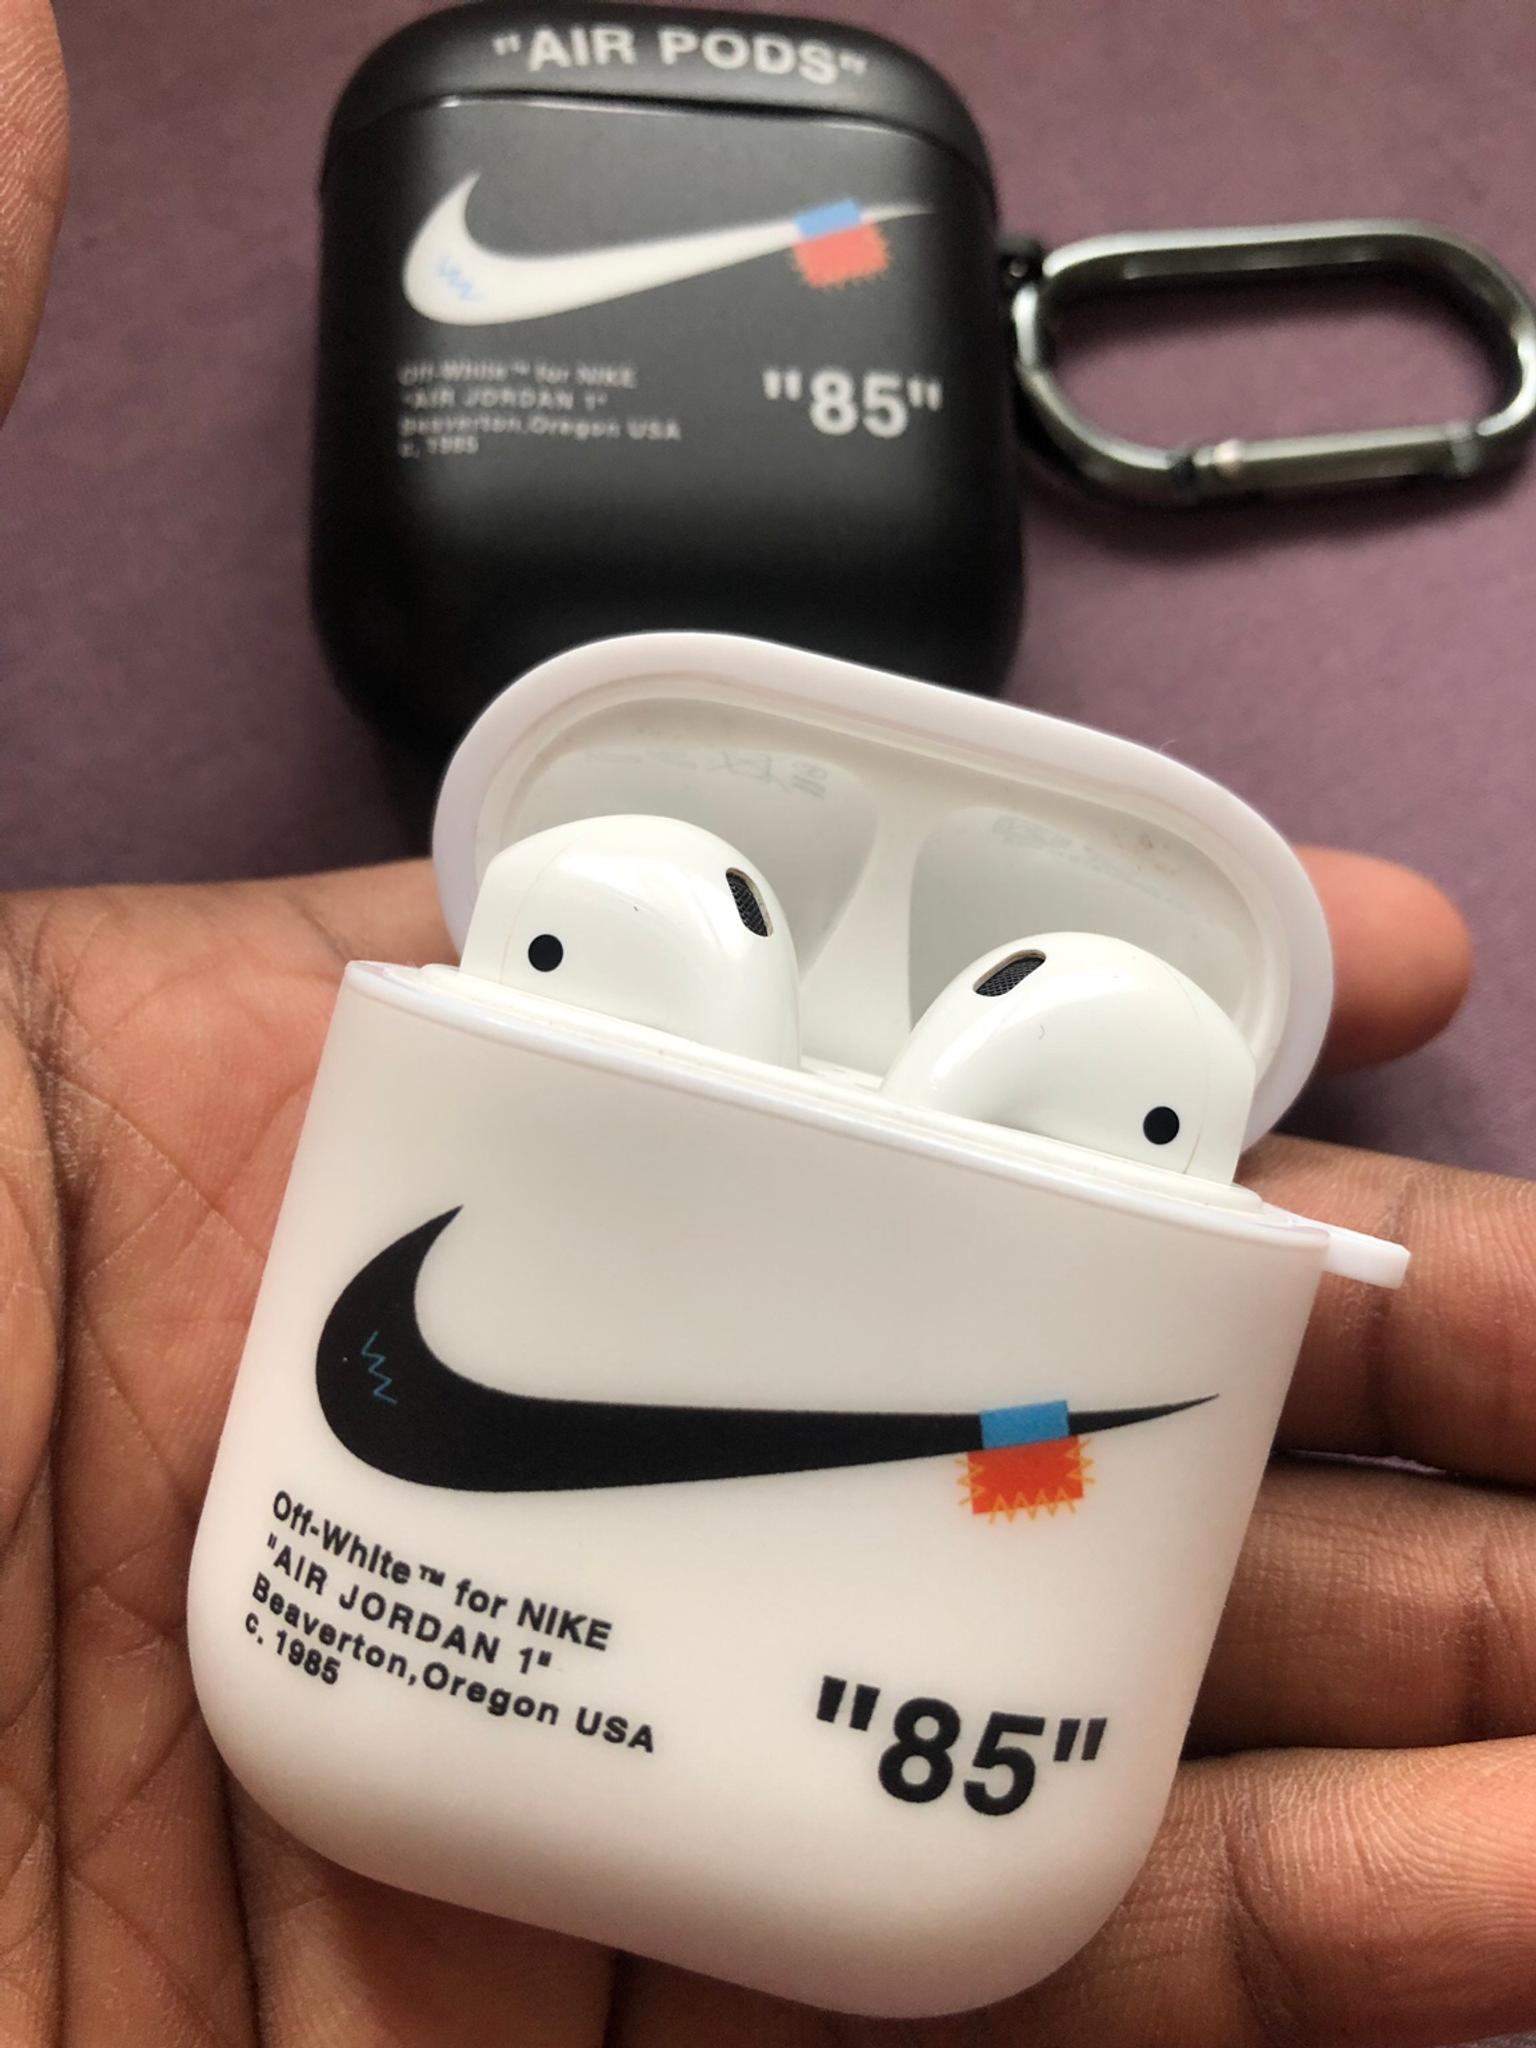 nike x off white airpods case